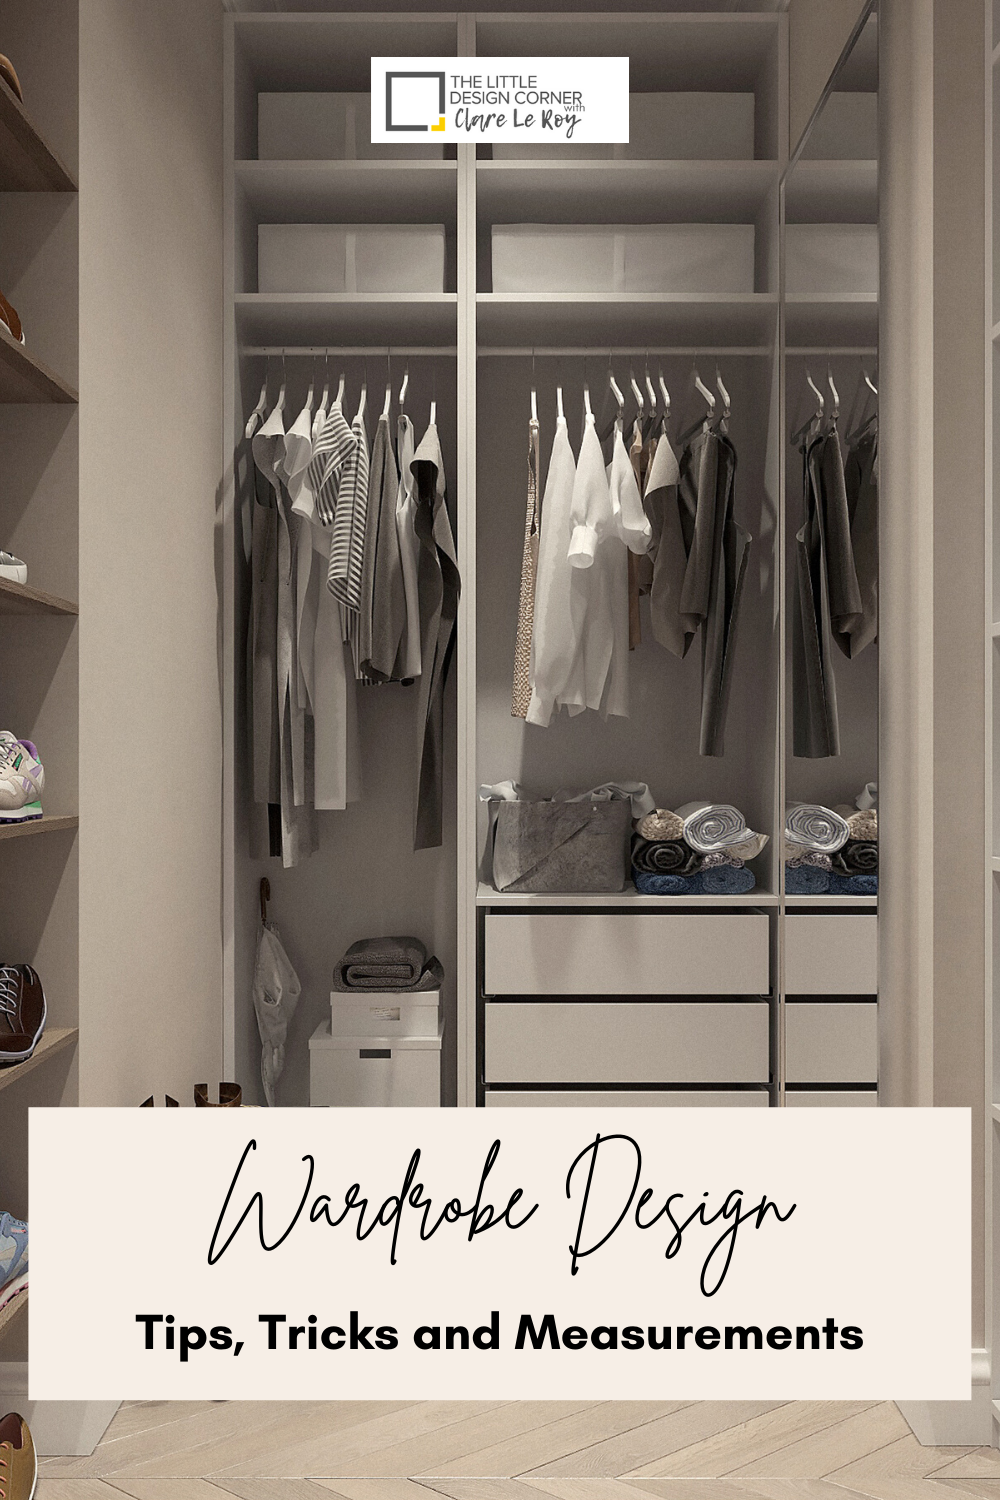 Operation Closet Space: How to Get Your Adult Kids' Stuff Out of